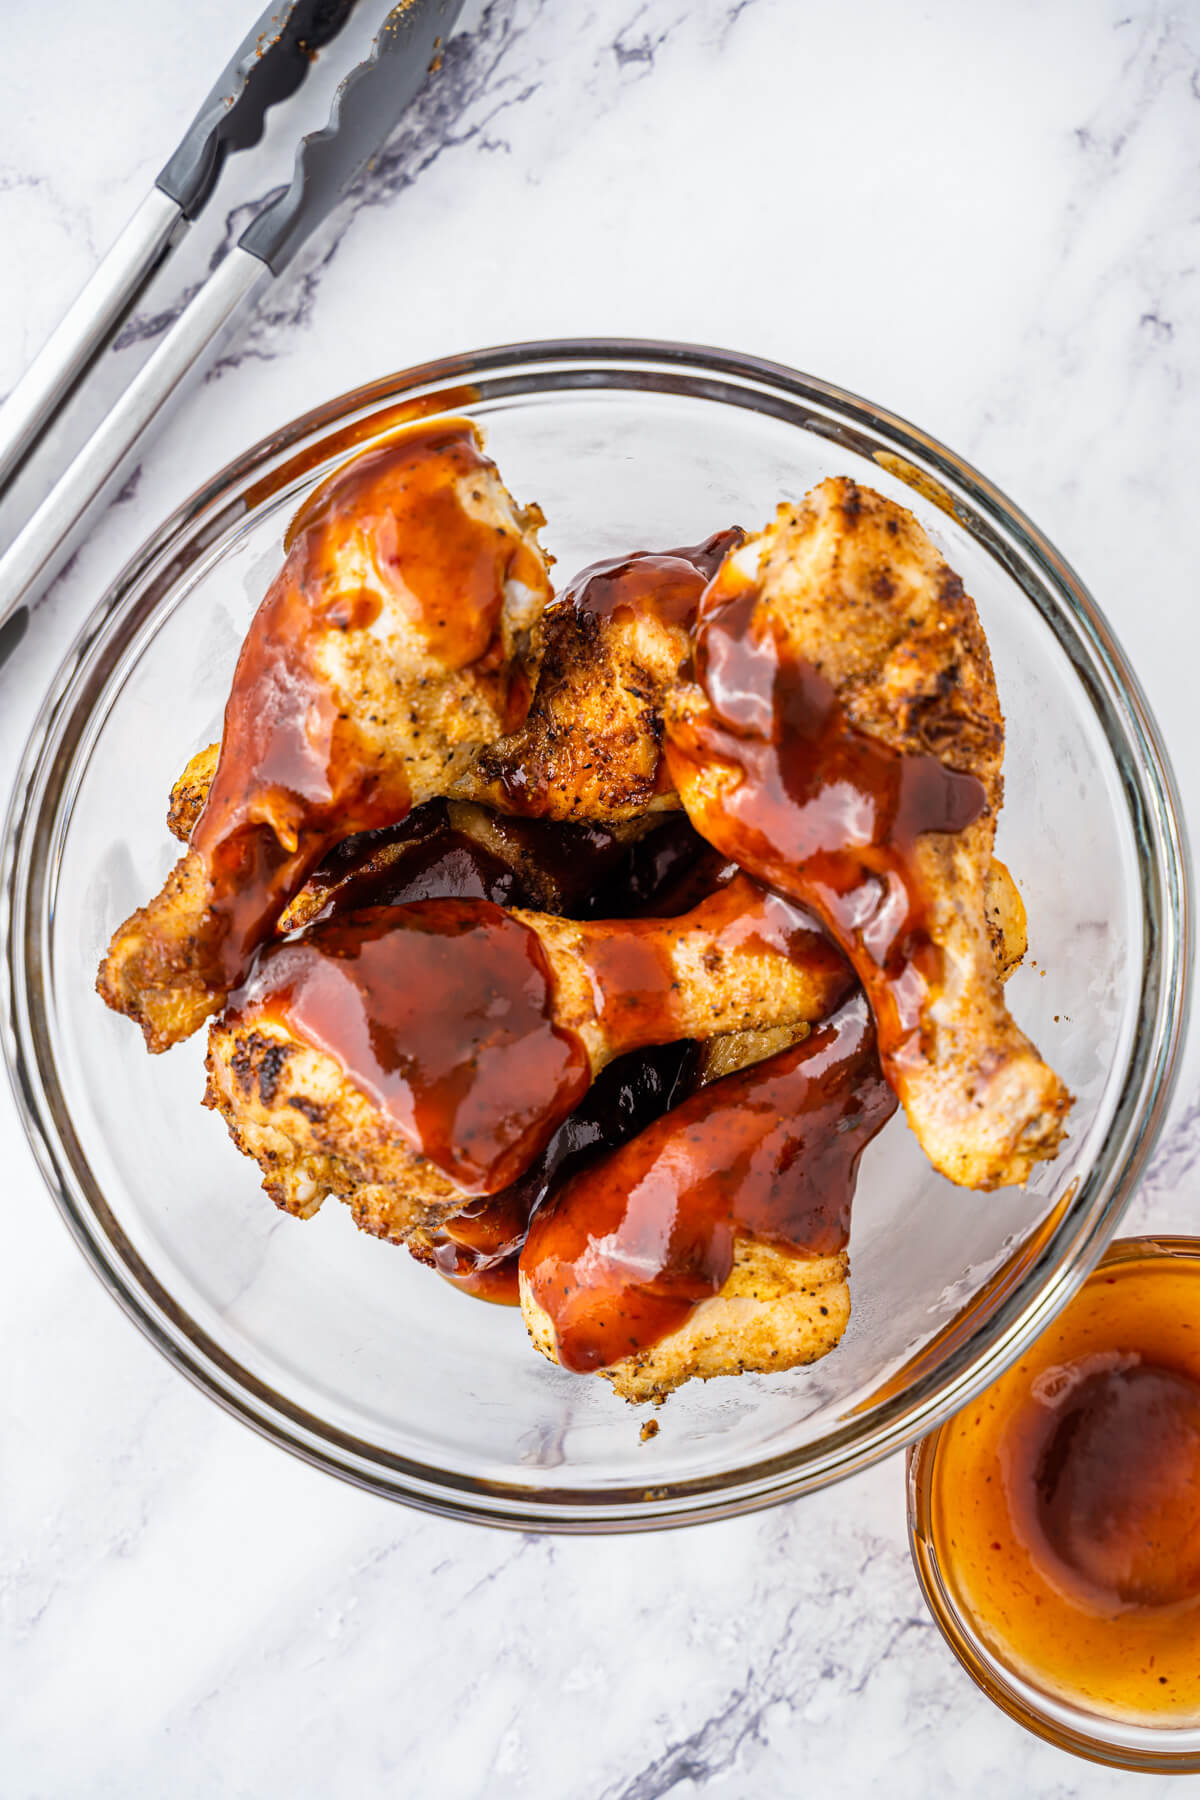 A glass bowl containing  chicken legs coated in barbecue sauce.